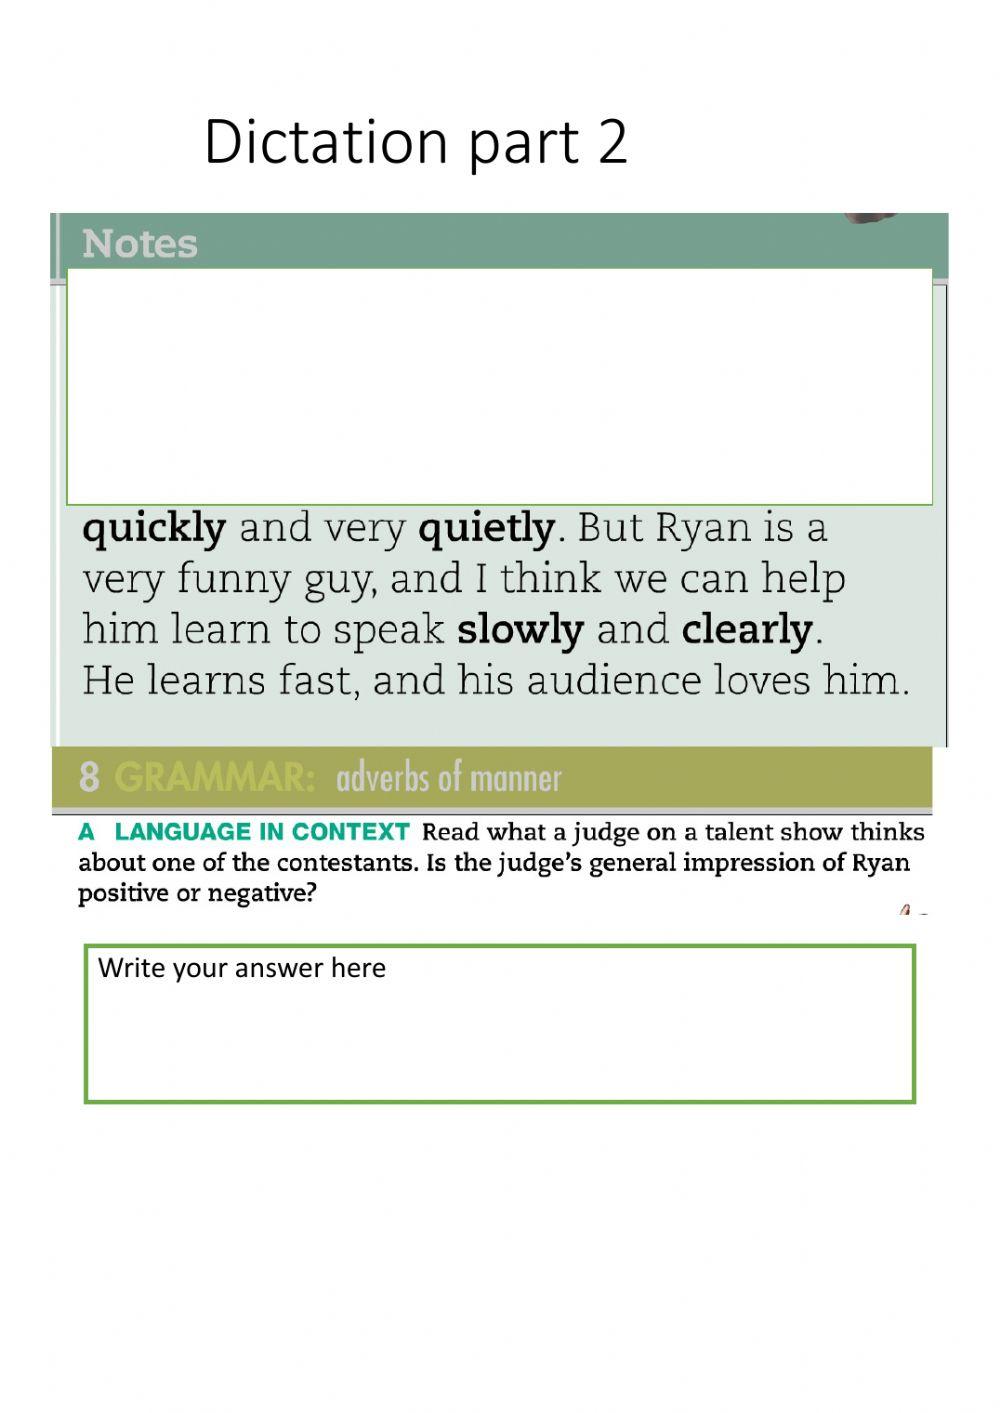 Dictation about adverbs of manner pt 2